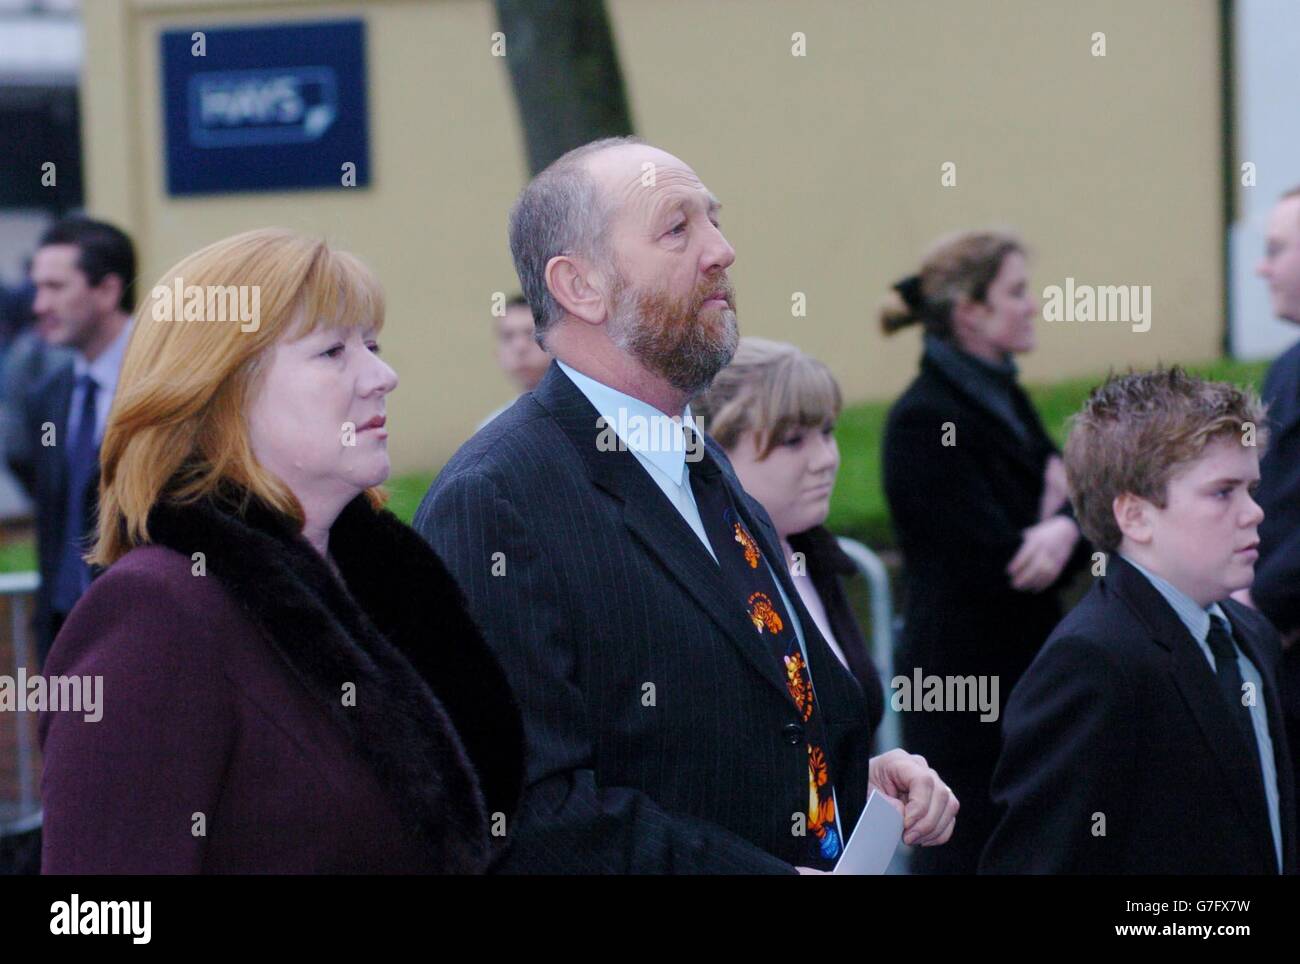 Deborah Martin (L) arrives with her children Louise (centre-back), 13, and James (R), 15, and an unidentified man at the Memorial Service for last month's Berkshire rail crash, at the Minister Church of St Mary in Reading. Louise's husband Stanley had been driving the train which collided with a motor vehicle, and was killed along with six others. Stock Photo